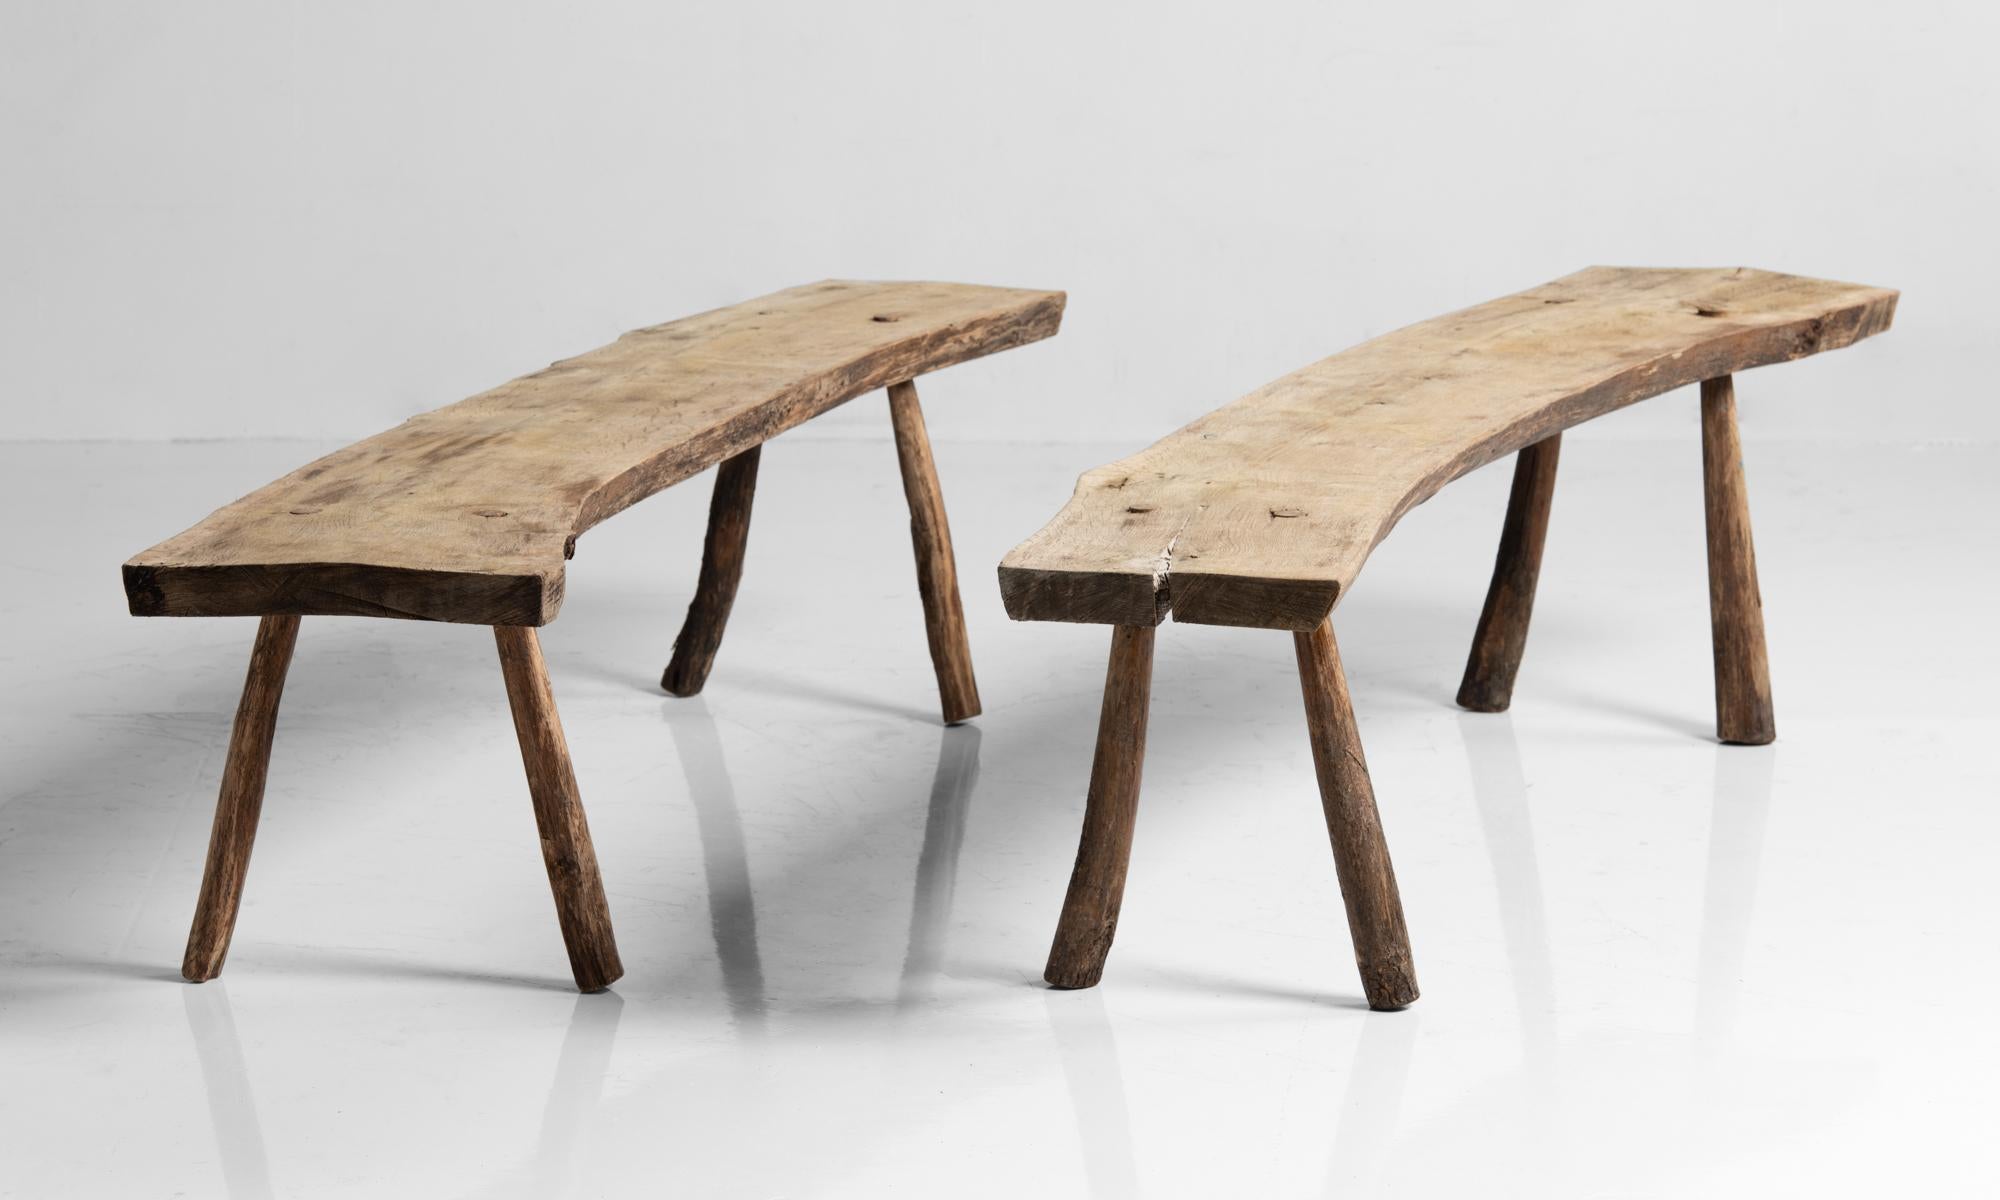 French Primitive Curved Oak Benches, France, circa 1890